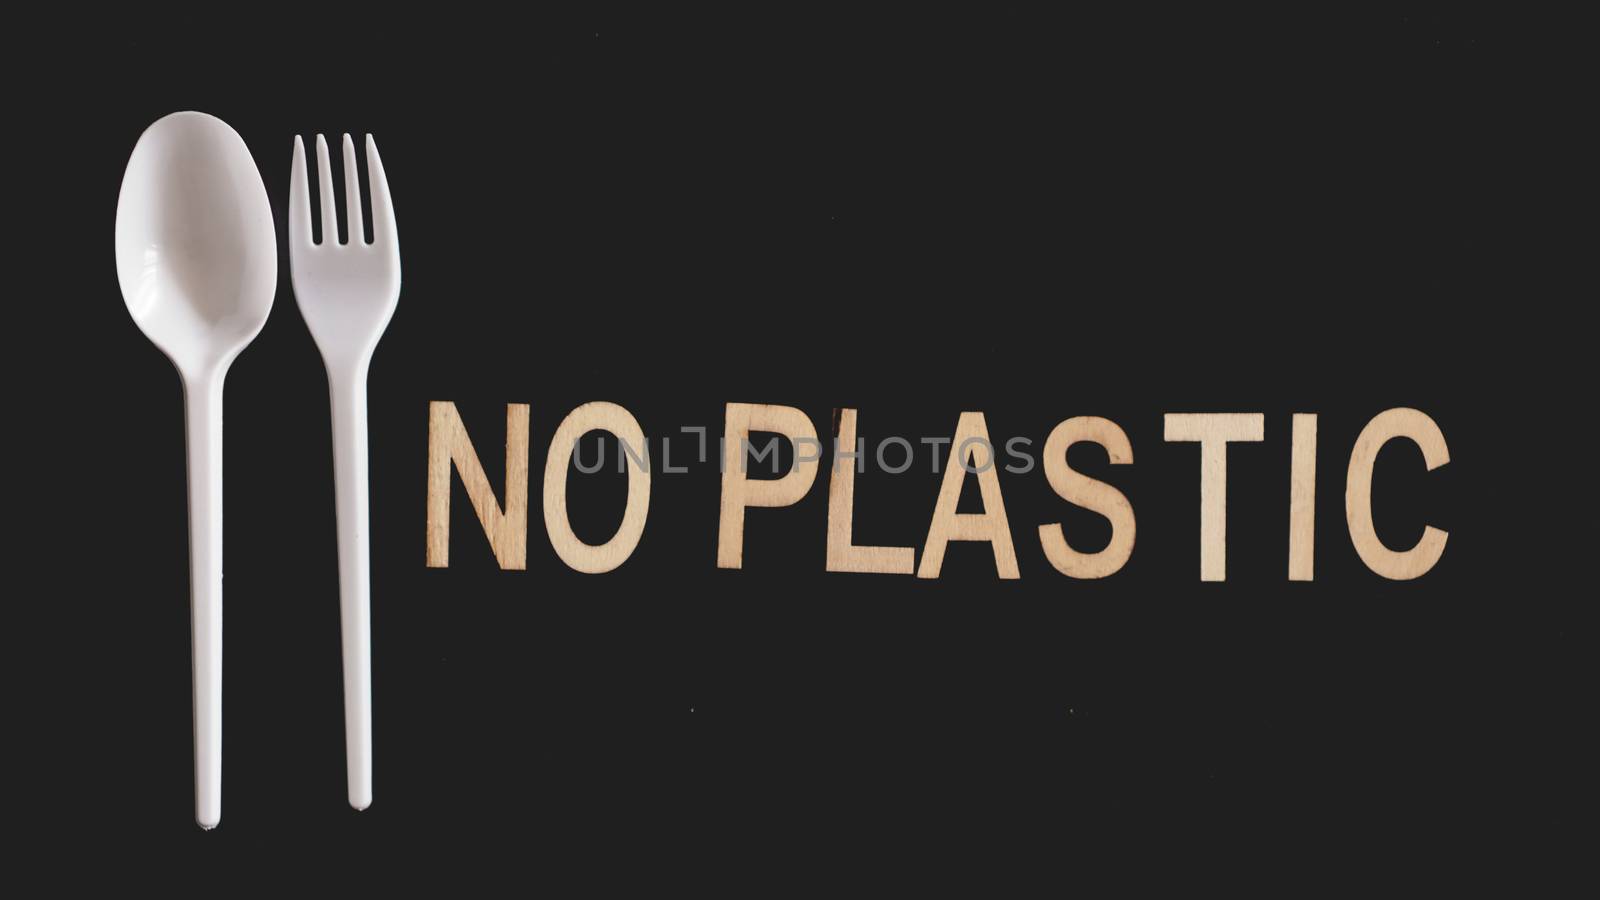 Say No Plastic Cutlery, Plastic Pollution and Environmental Protection Concept, Top View on black background